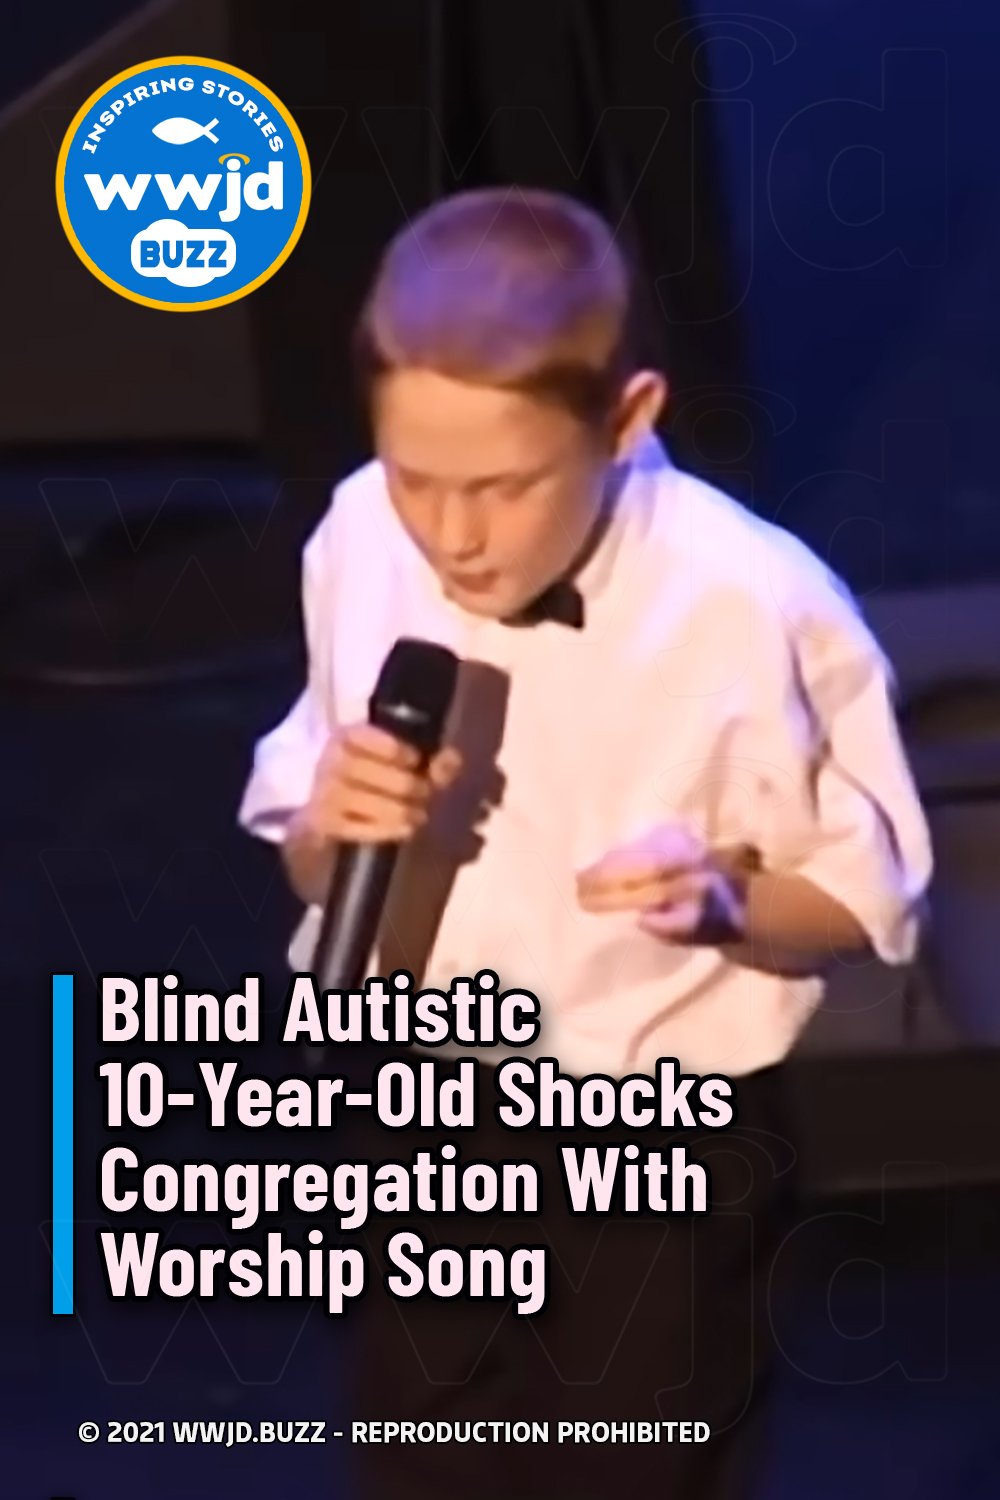 Blind Autistic 10-Year-Old Shocks Congregation With Worship Song